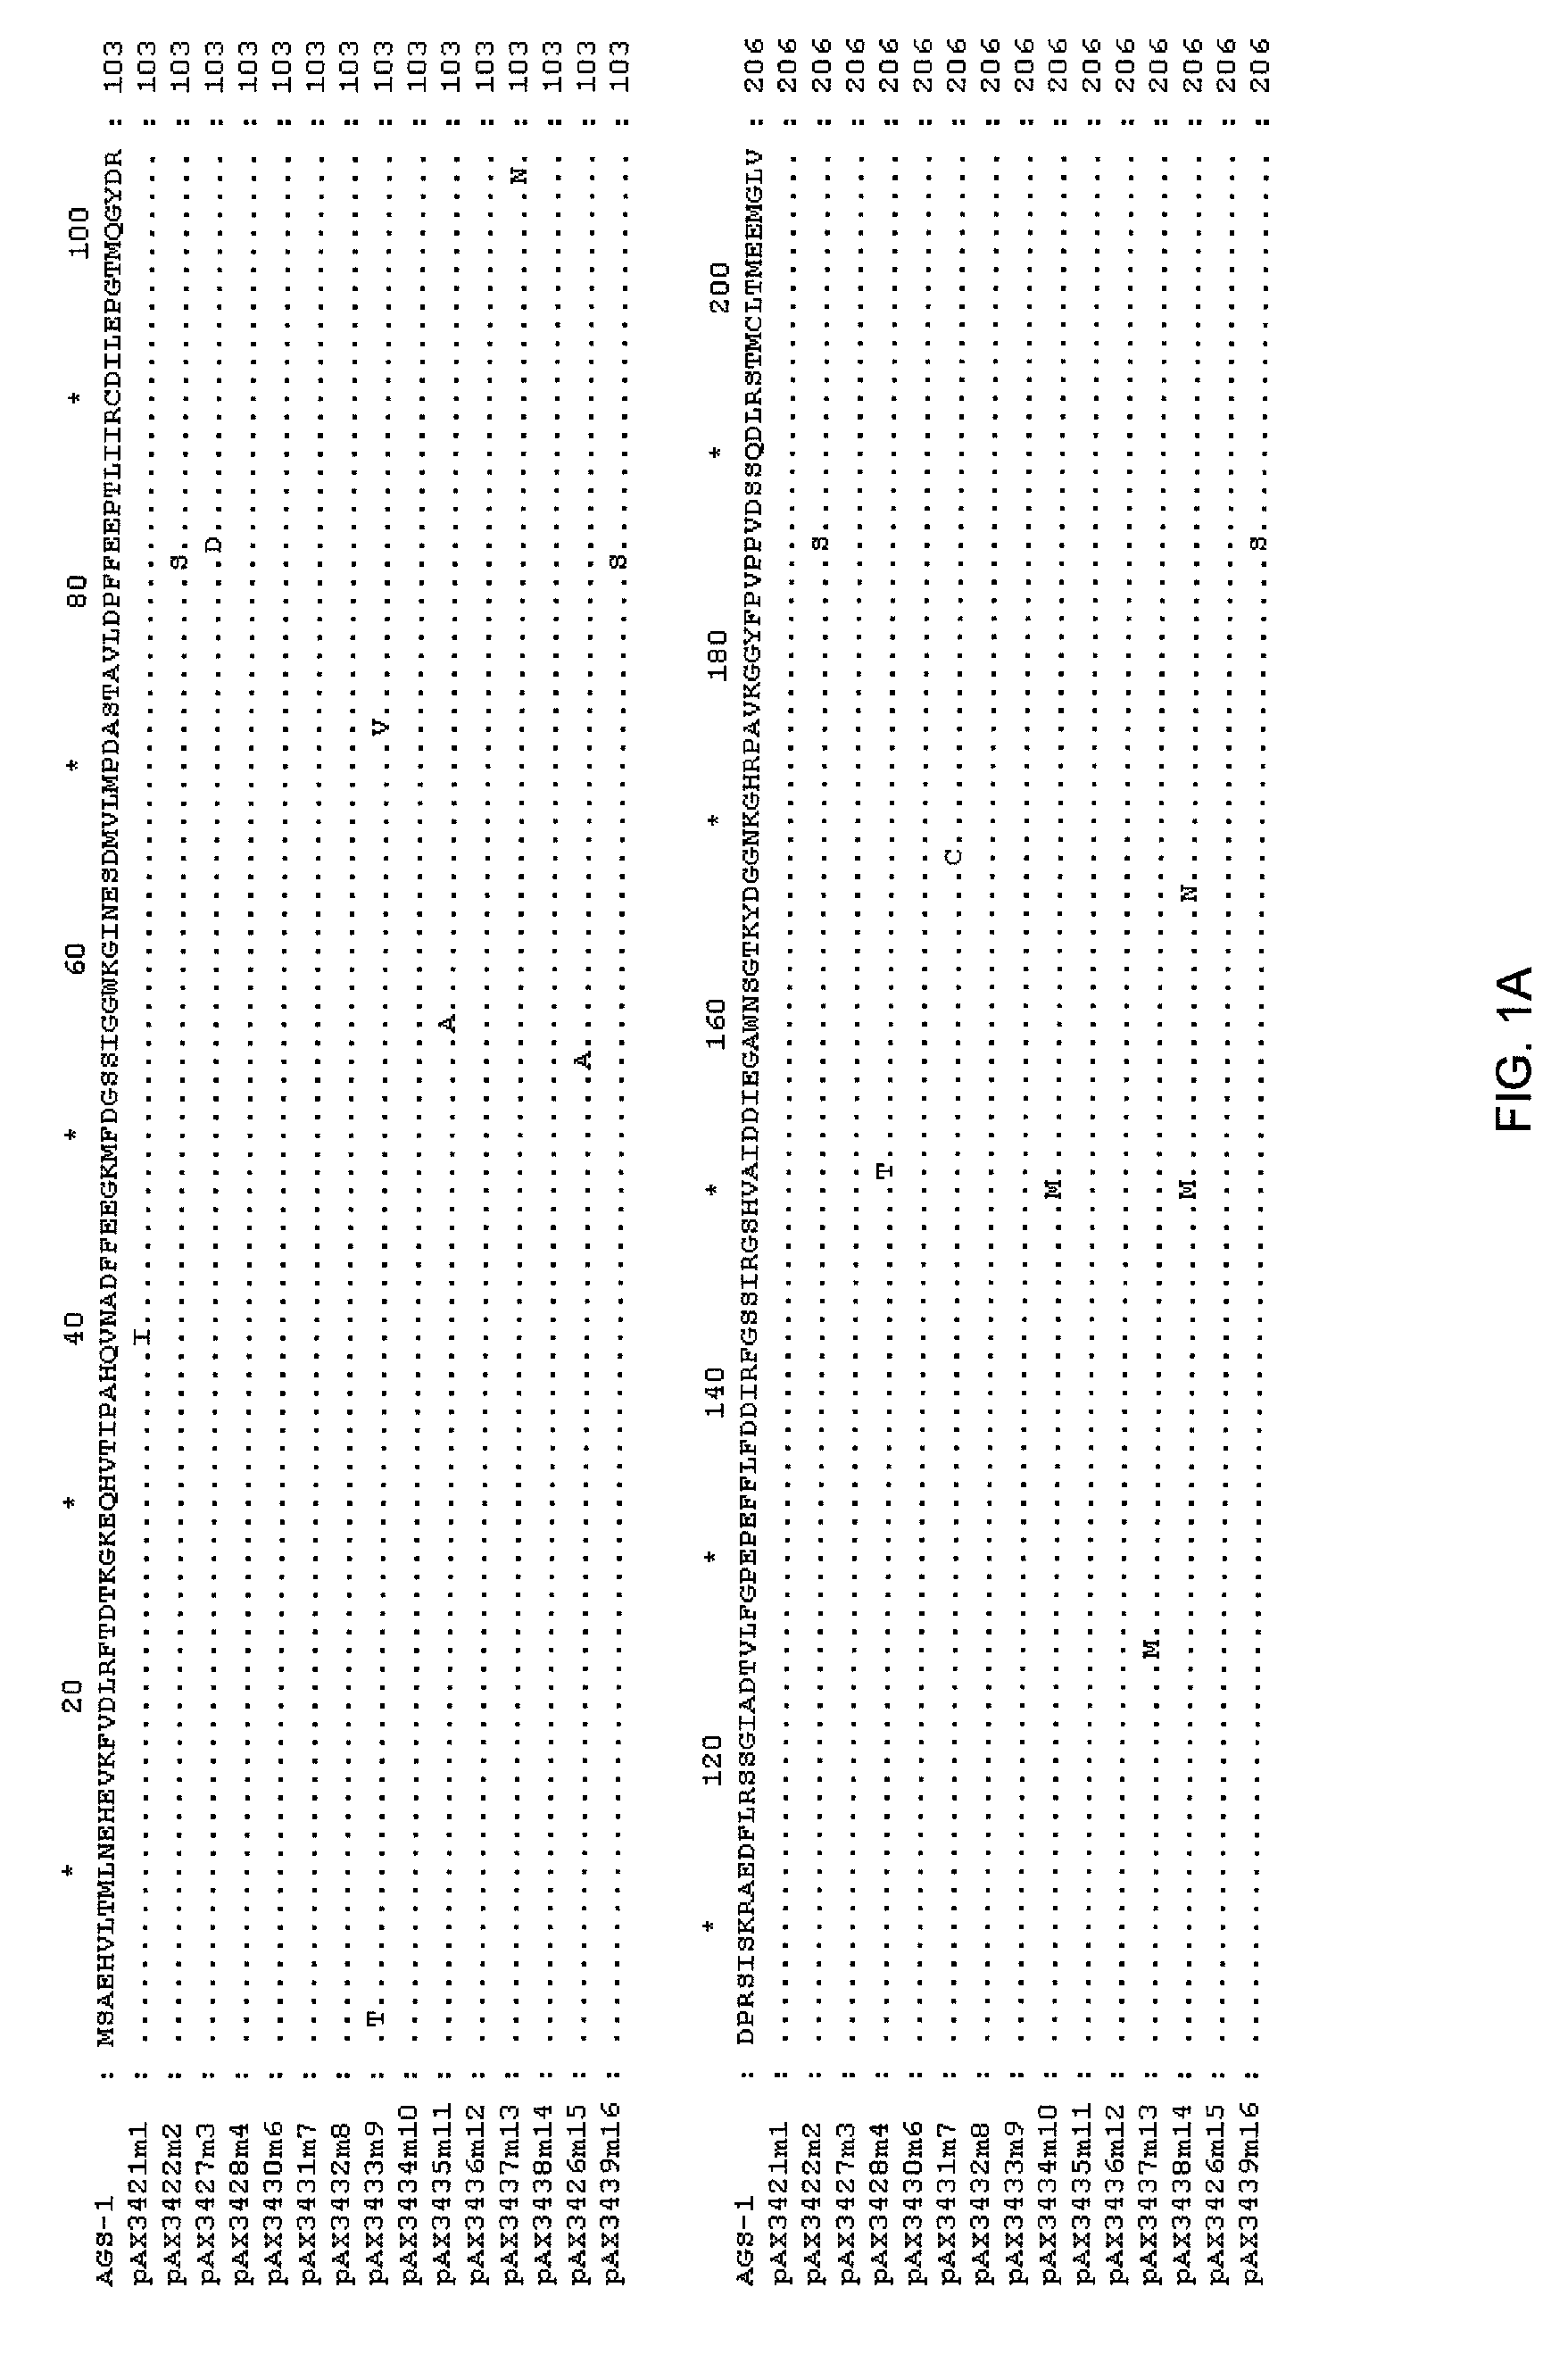 Bacterial glutamine synthetases and methods of use